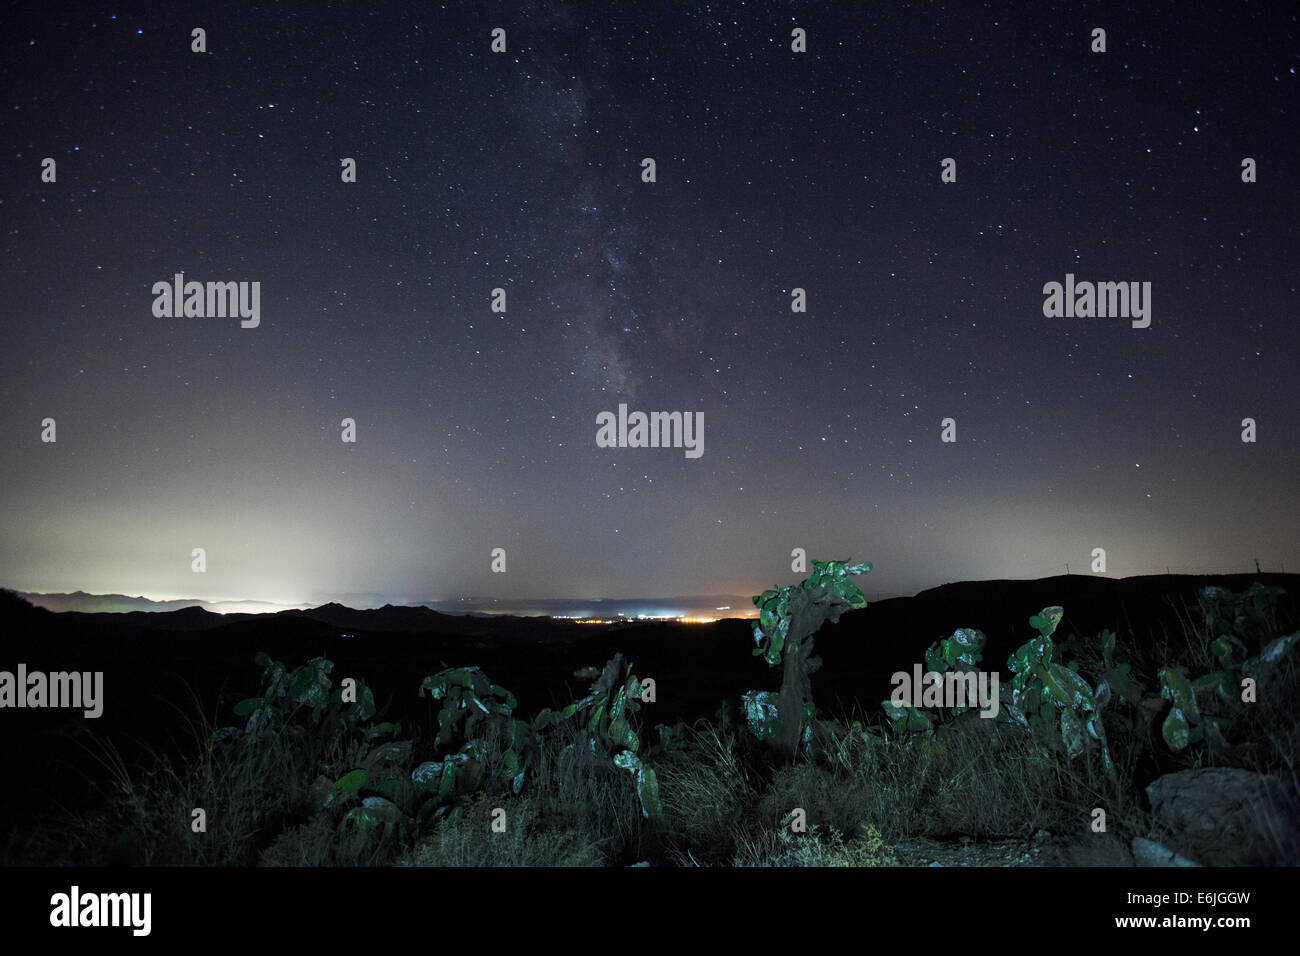 The milky way star formation above cactus's and a small village in Spain at Night. Taken on the Ridgway of a Valley Stock Photo